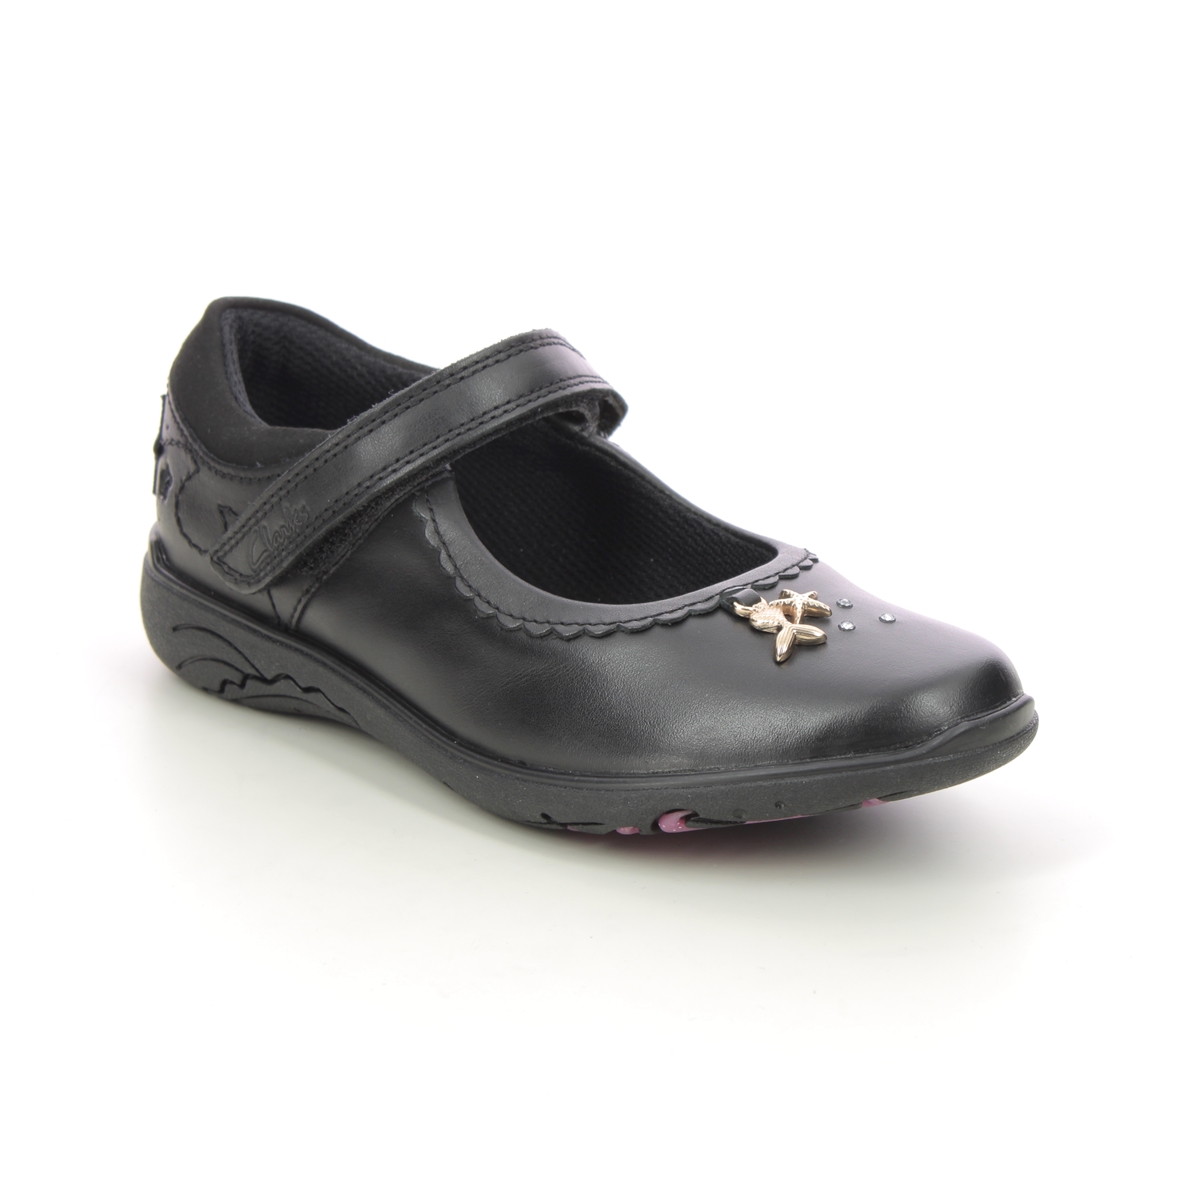 Clarks Relda Sea K Mary Jane Black leather Kids girls school shoes 7224-07G in a Plain Leather in Size 13